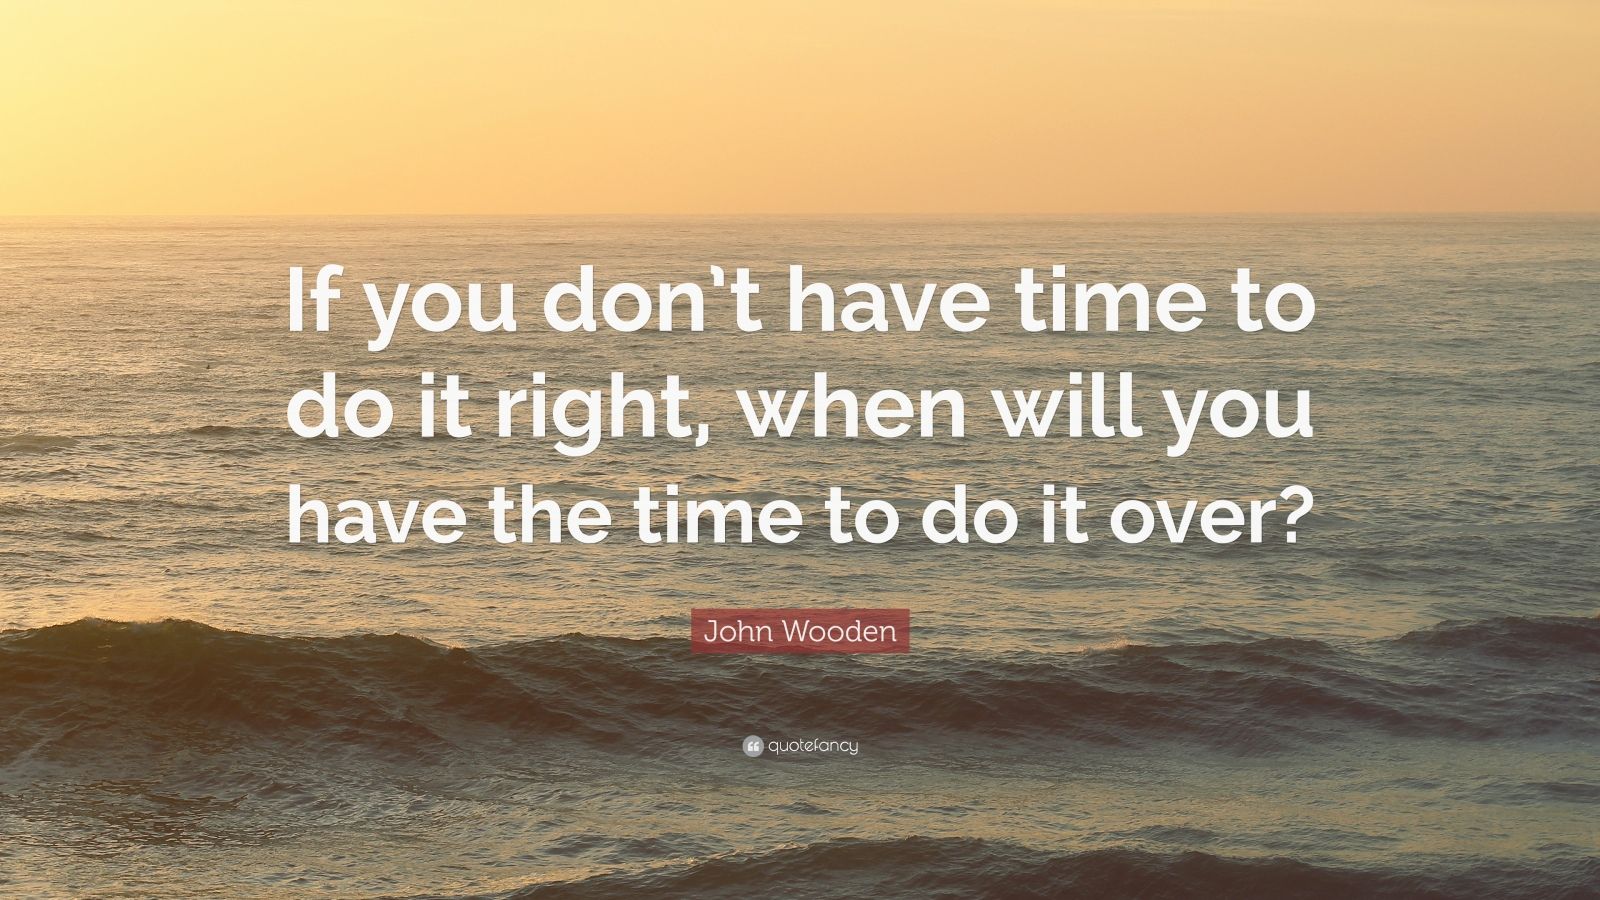 John Wooden Quote: “If you don’t have time to do it right, when will